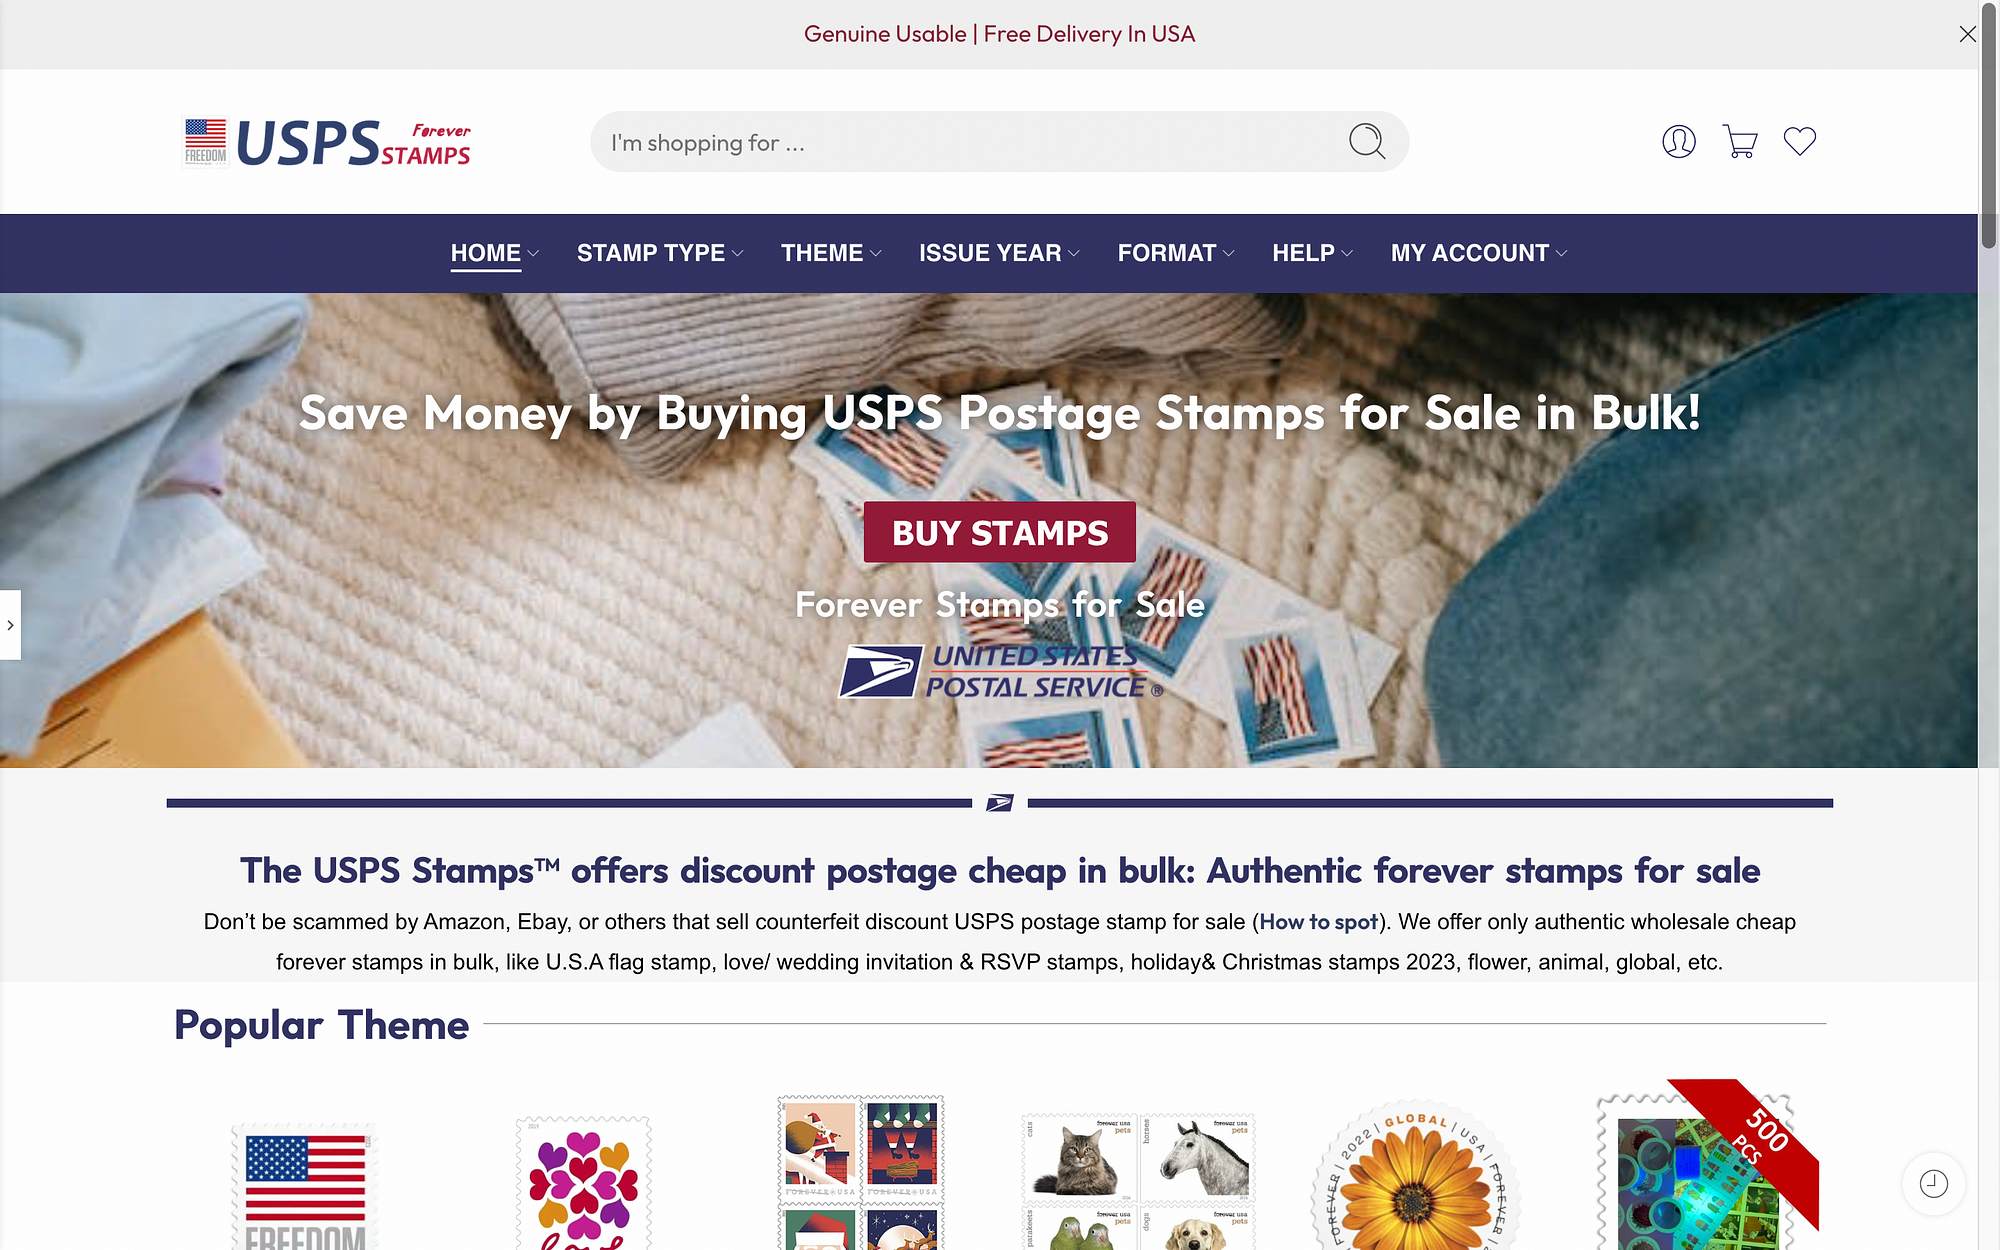 Buy Cheap Forever Stamps in Bulk: A Travel Agency Saved $1K! | by John  Taylor | Medium